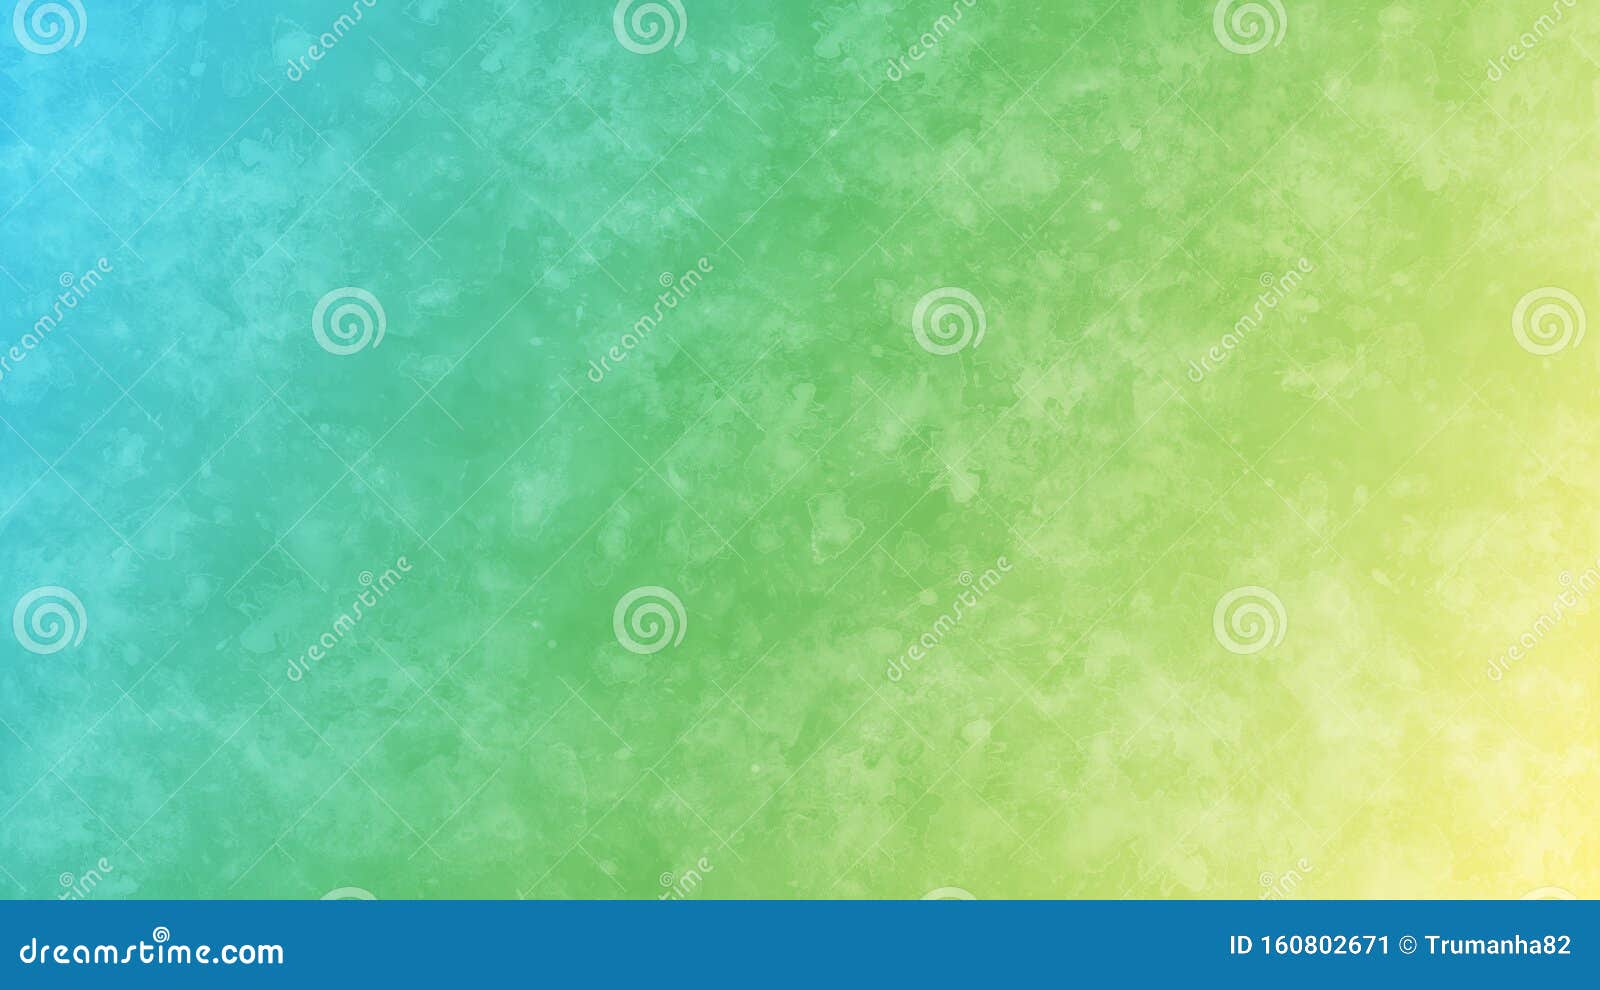 blue, green and yellow gradient background with grunge watercolor texture